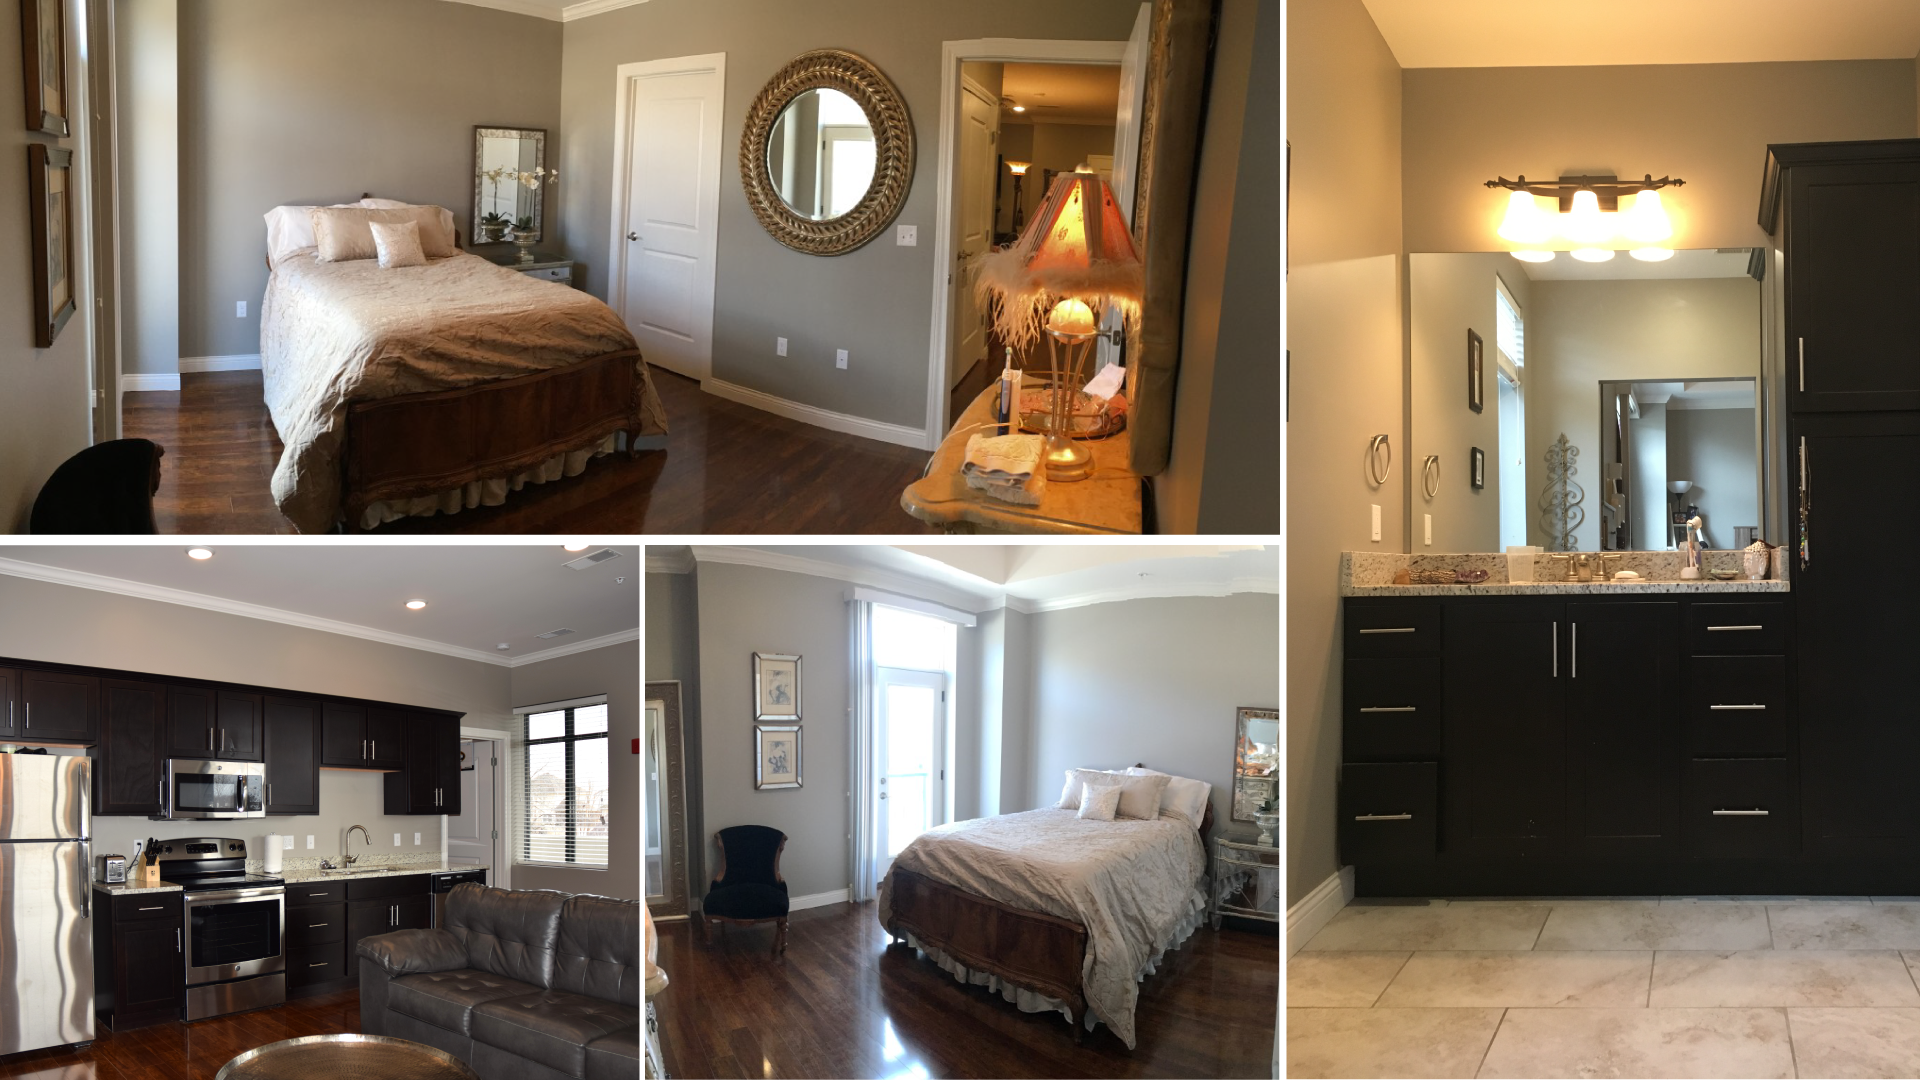 A Collage of the Luxurious Apartments at The Lofts at Cherry Hill in Columbia, MO